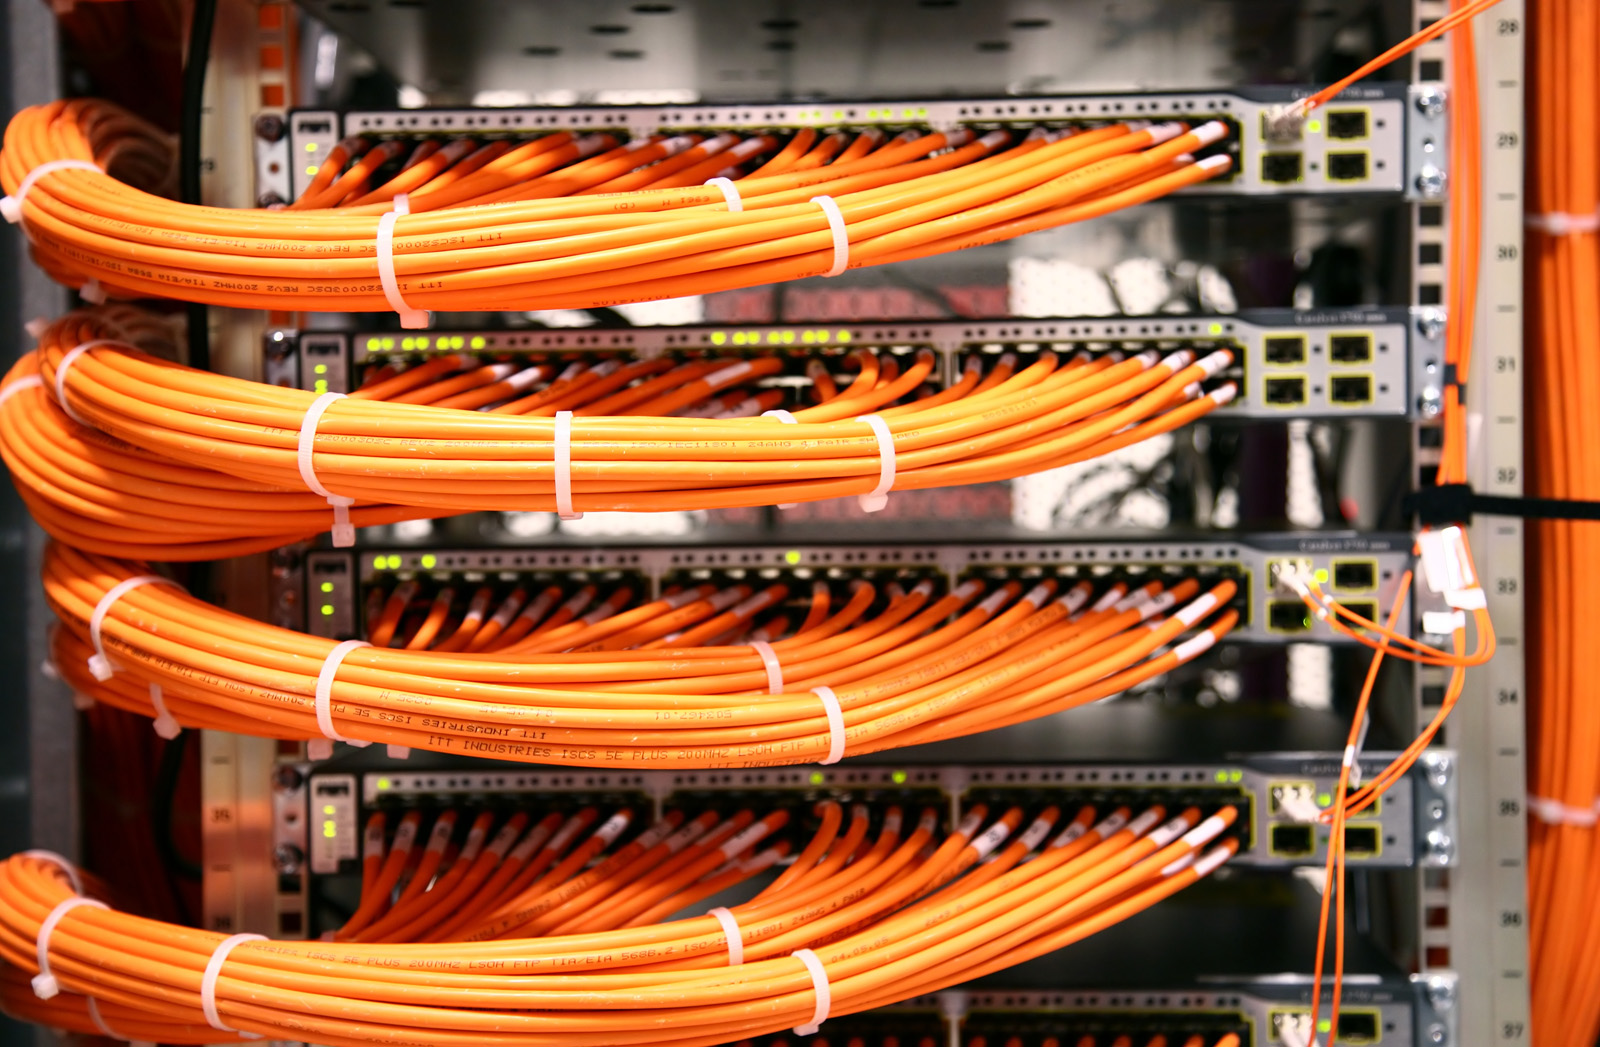 Lewisport Kentucky Trusted Voice & Data Network Cabling Solutions